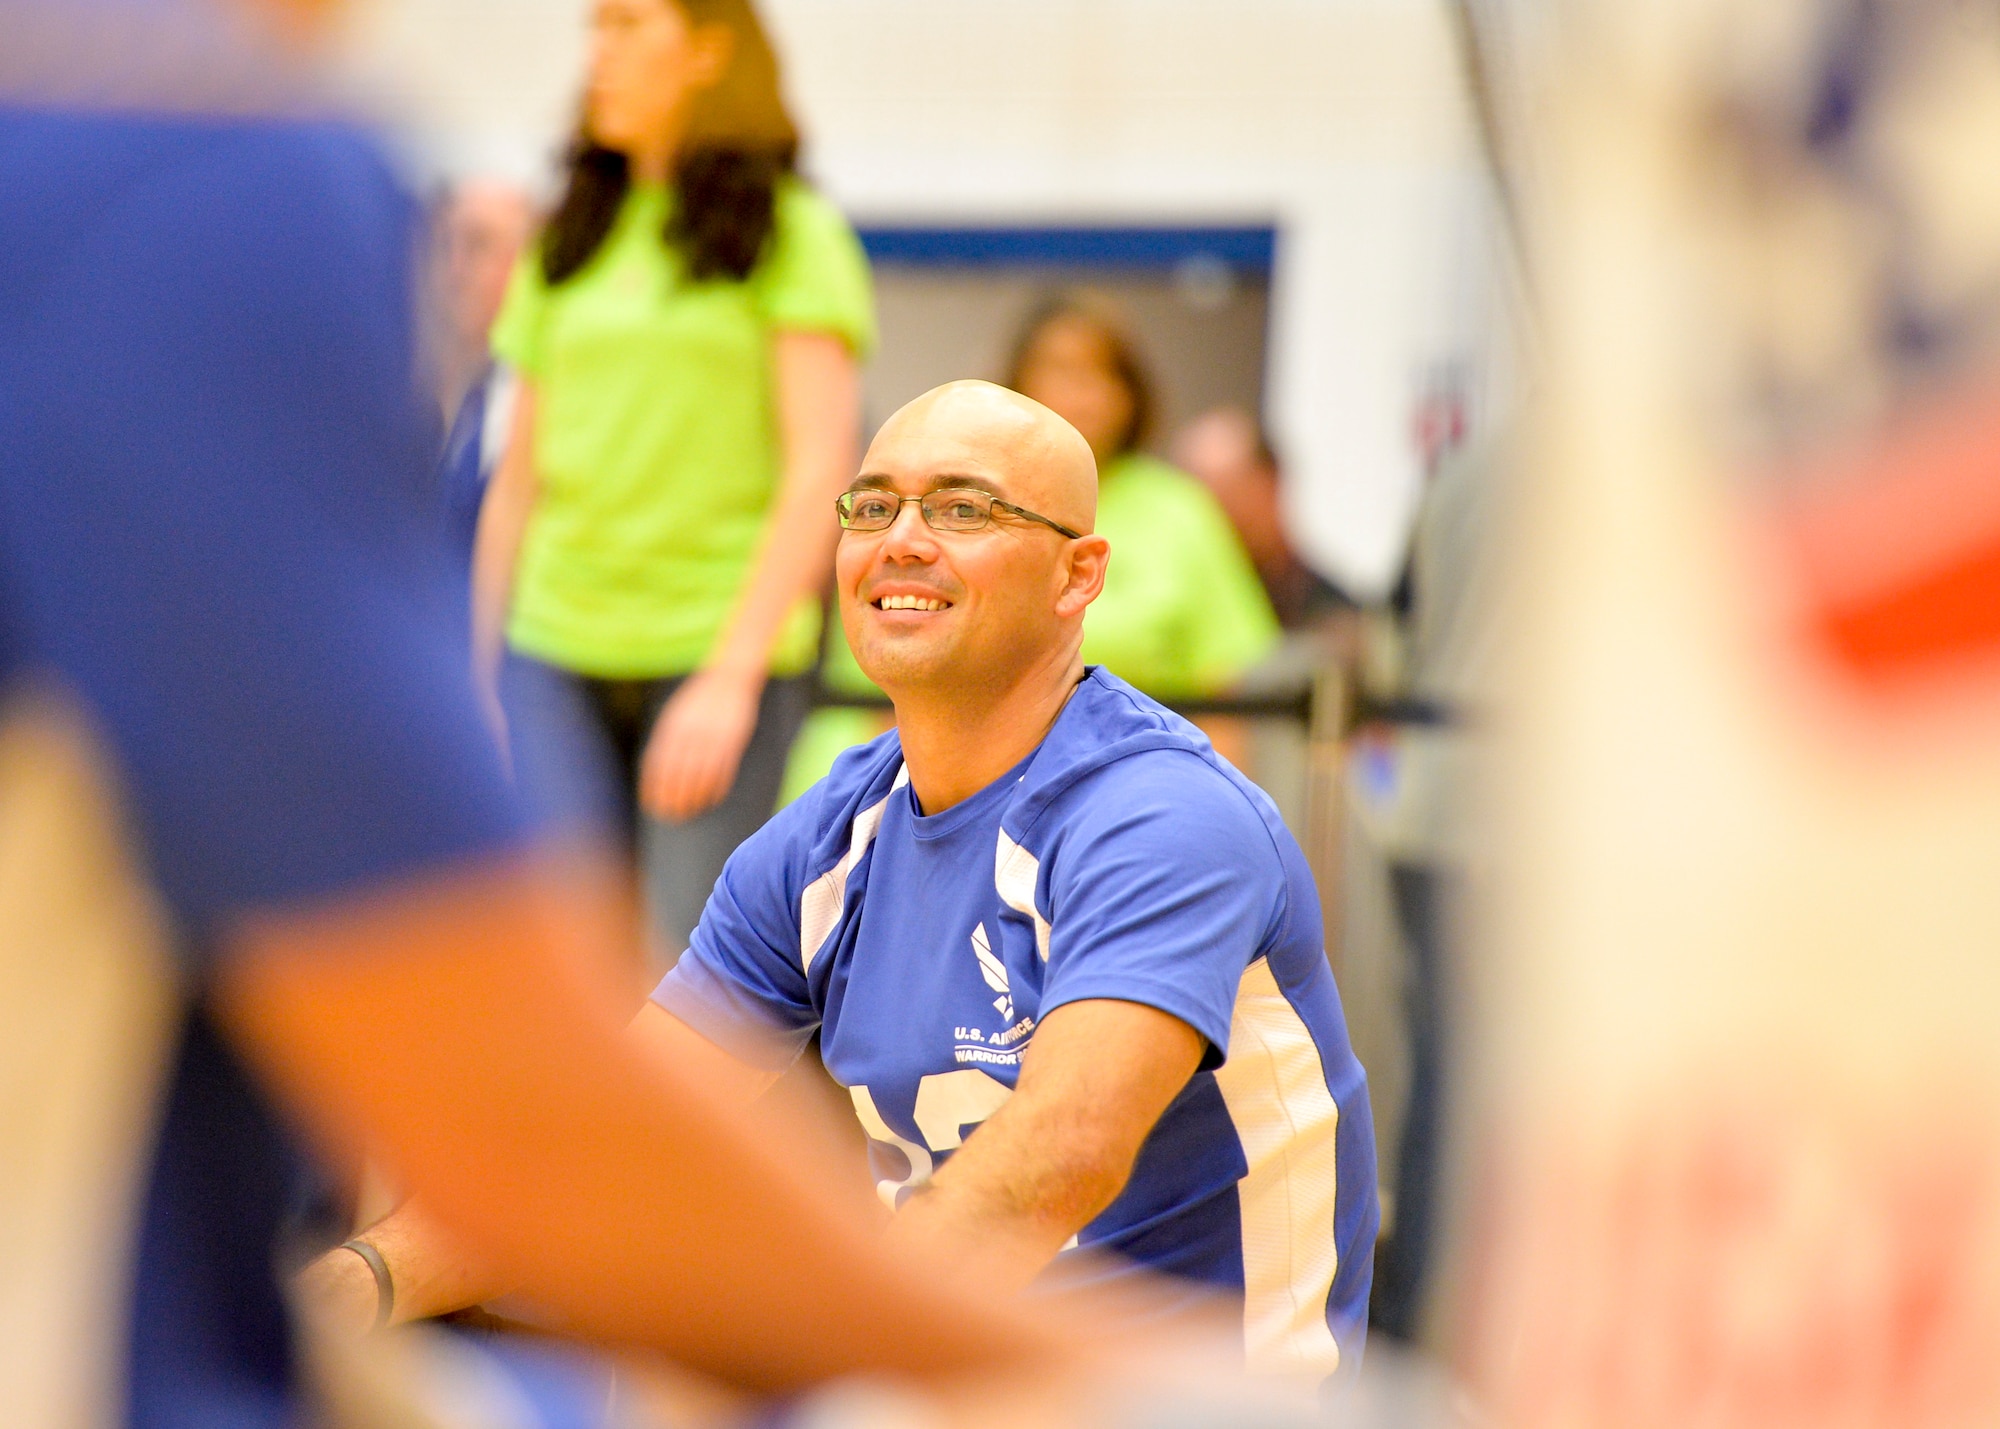 Air Force Master Sgt. Christopher Aguilera warms up prior to the start of the 2014 Warrior Games sitting volleyball bronze medal match between the Air Force and the Army Oct. 1, 2014, at the U.S. Olympic Training Center in Colorado Springs, Colo. The Army beat the Air Force in two sets, 25-20, 25-19. (U.S. Air Force photo/Staff Sgt. Devon Suits) 